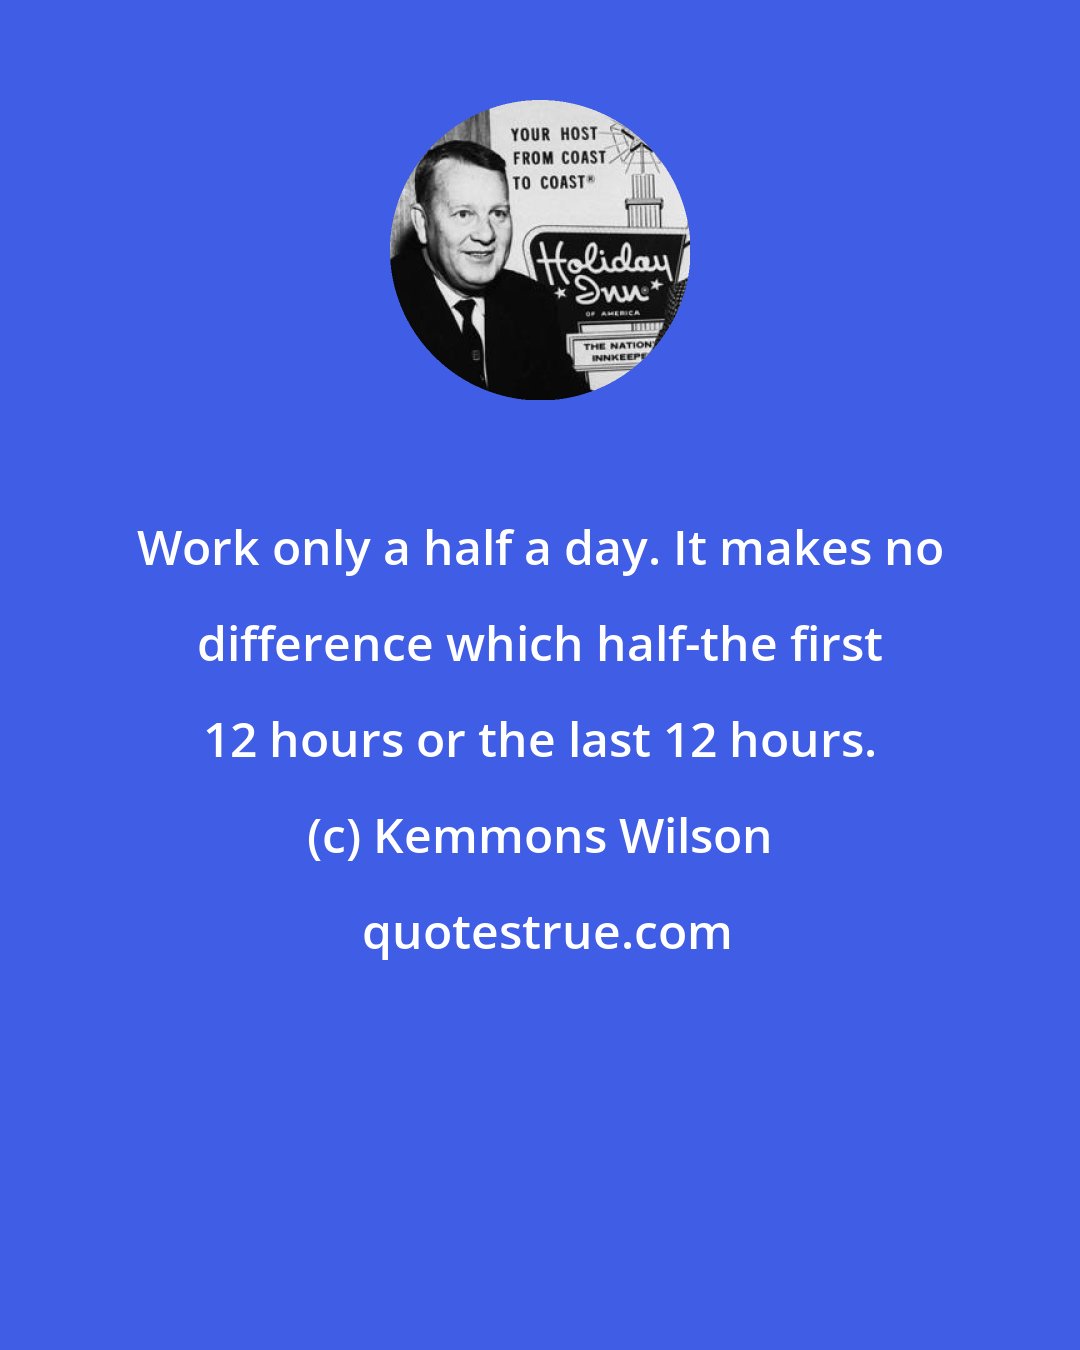 Kemmons Wilson: Work only a half a day. It makes no difference which half-the first 12 hours or the last 12 hours.